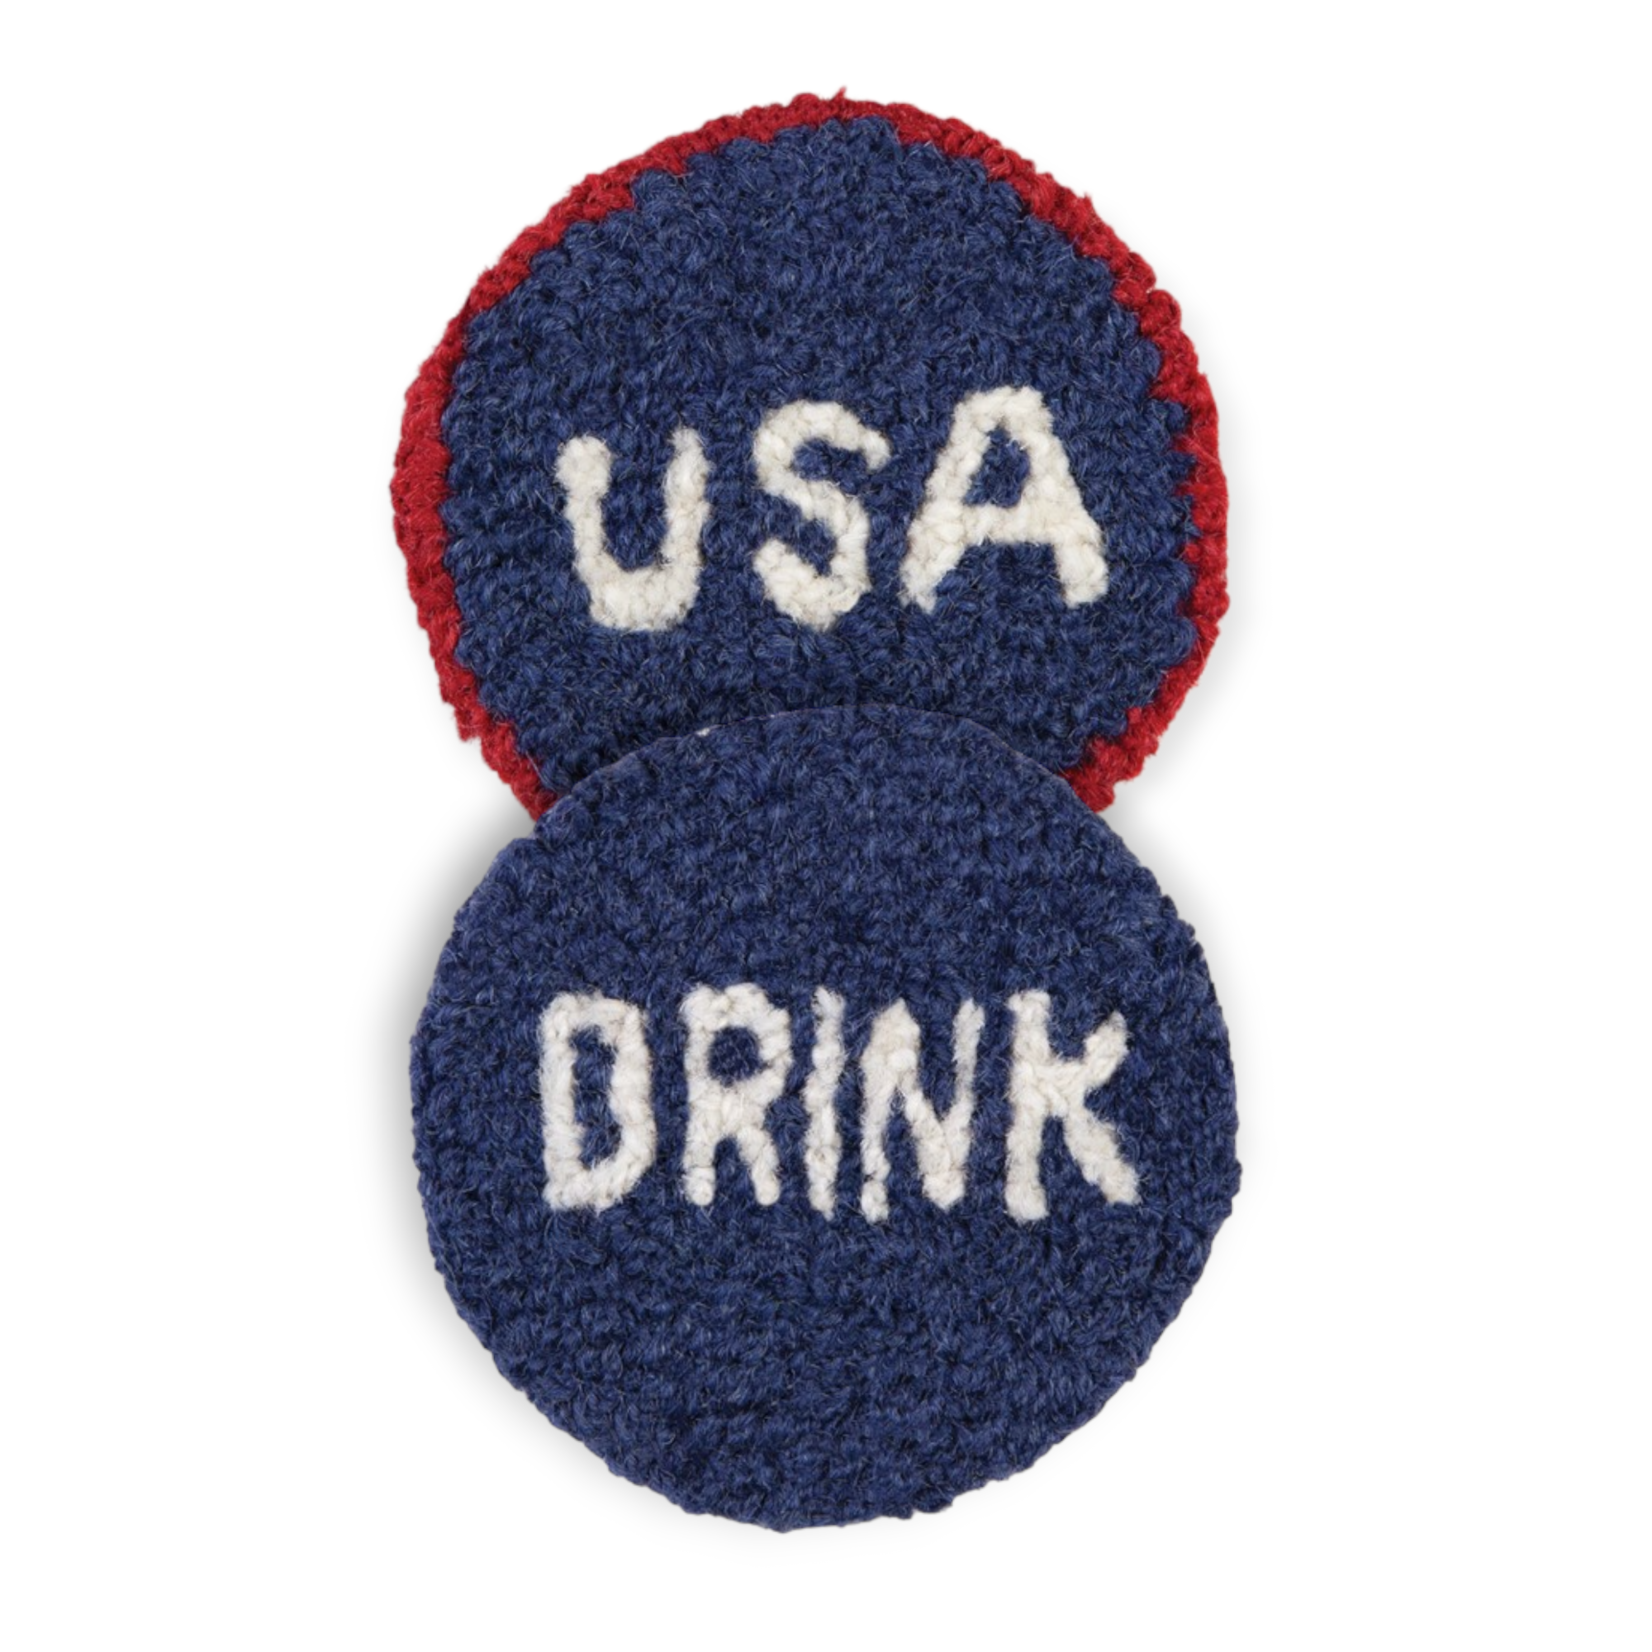 Set of two 4th of July Wool Hooked Coasters